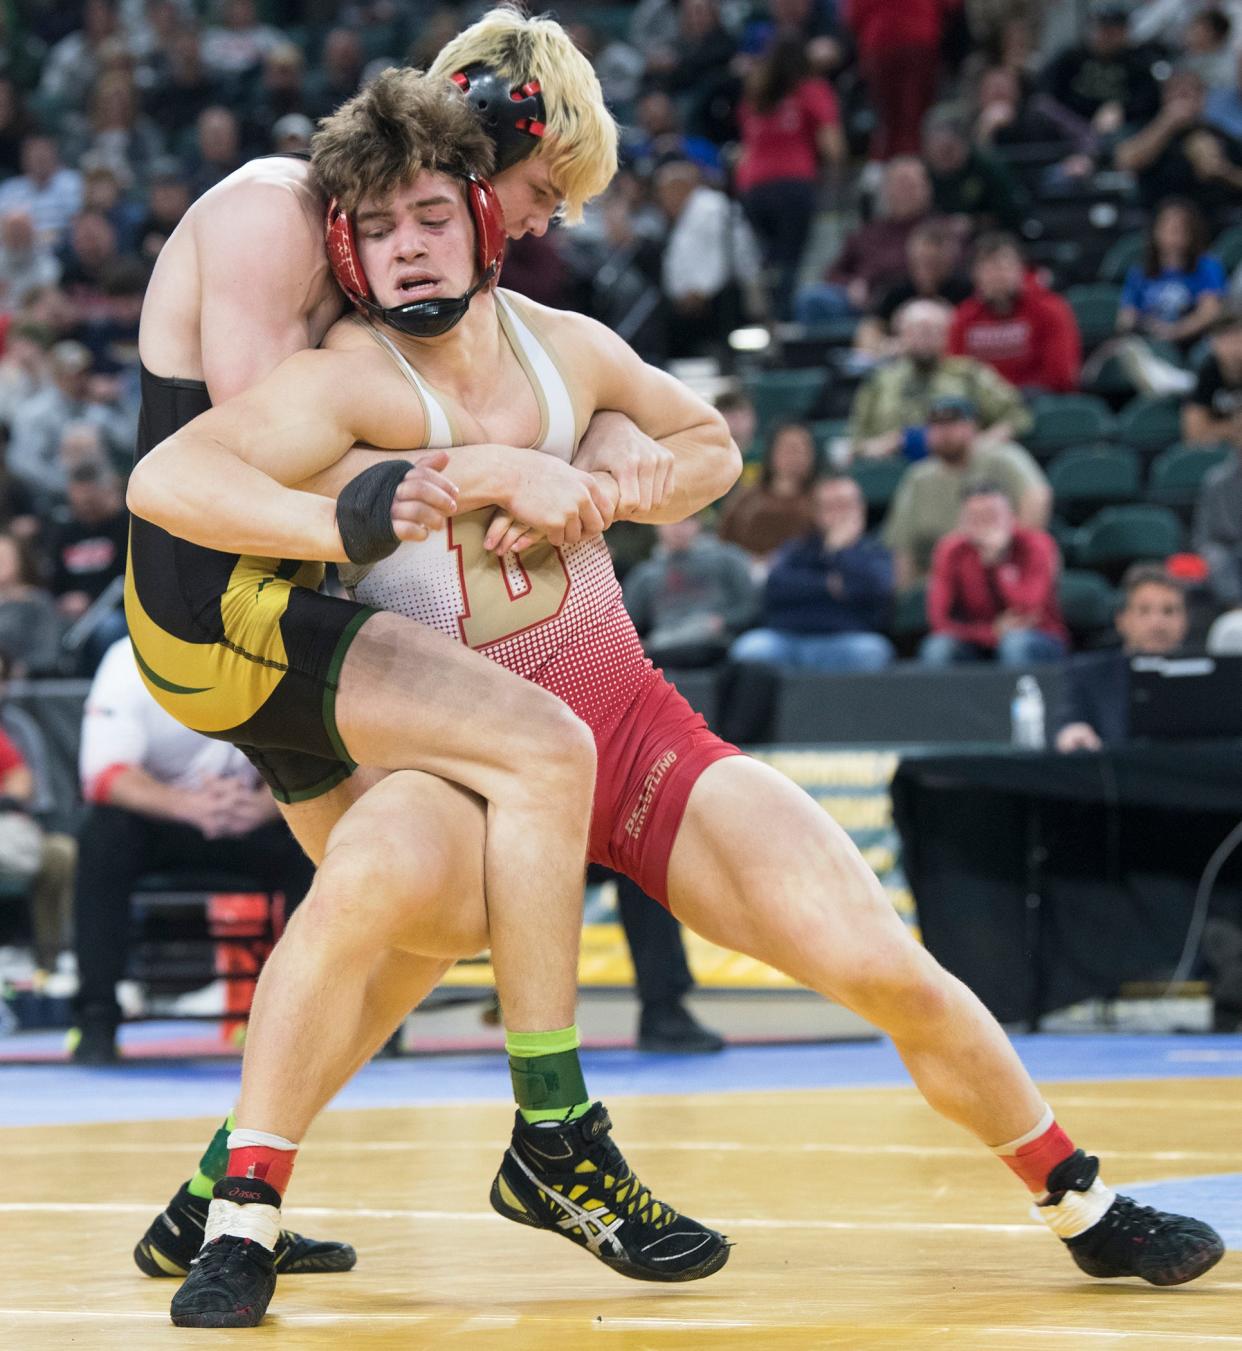 Delsea's Jared Schoppe, front, works to escape a hold from Brick Memorial's Harvey Ludington during the 175 lb. bout of the final round of the 2022 NJSIAA Wrestling Championships held at Boardwalk Hall in Atlantic City on Saturday, March 5, 2022.   Ludington defeated Schoppe, 5-2.